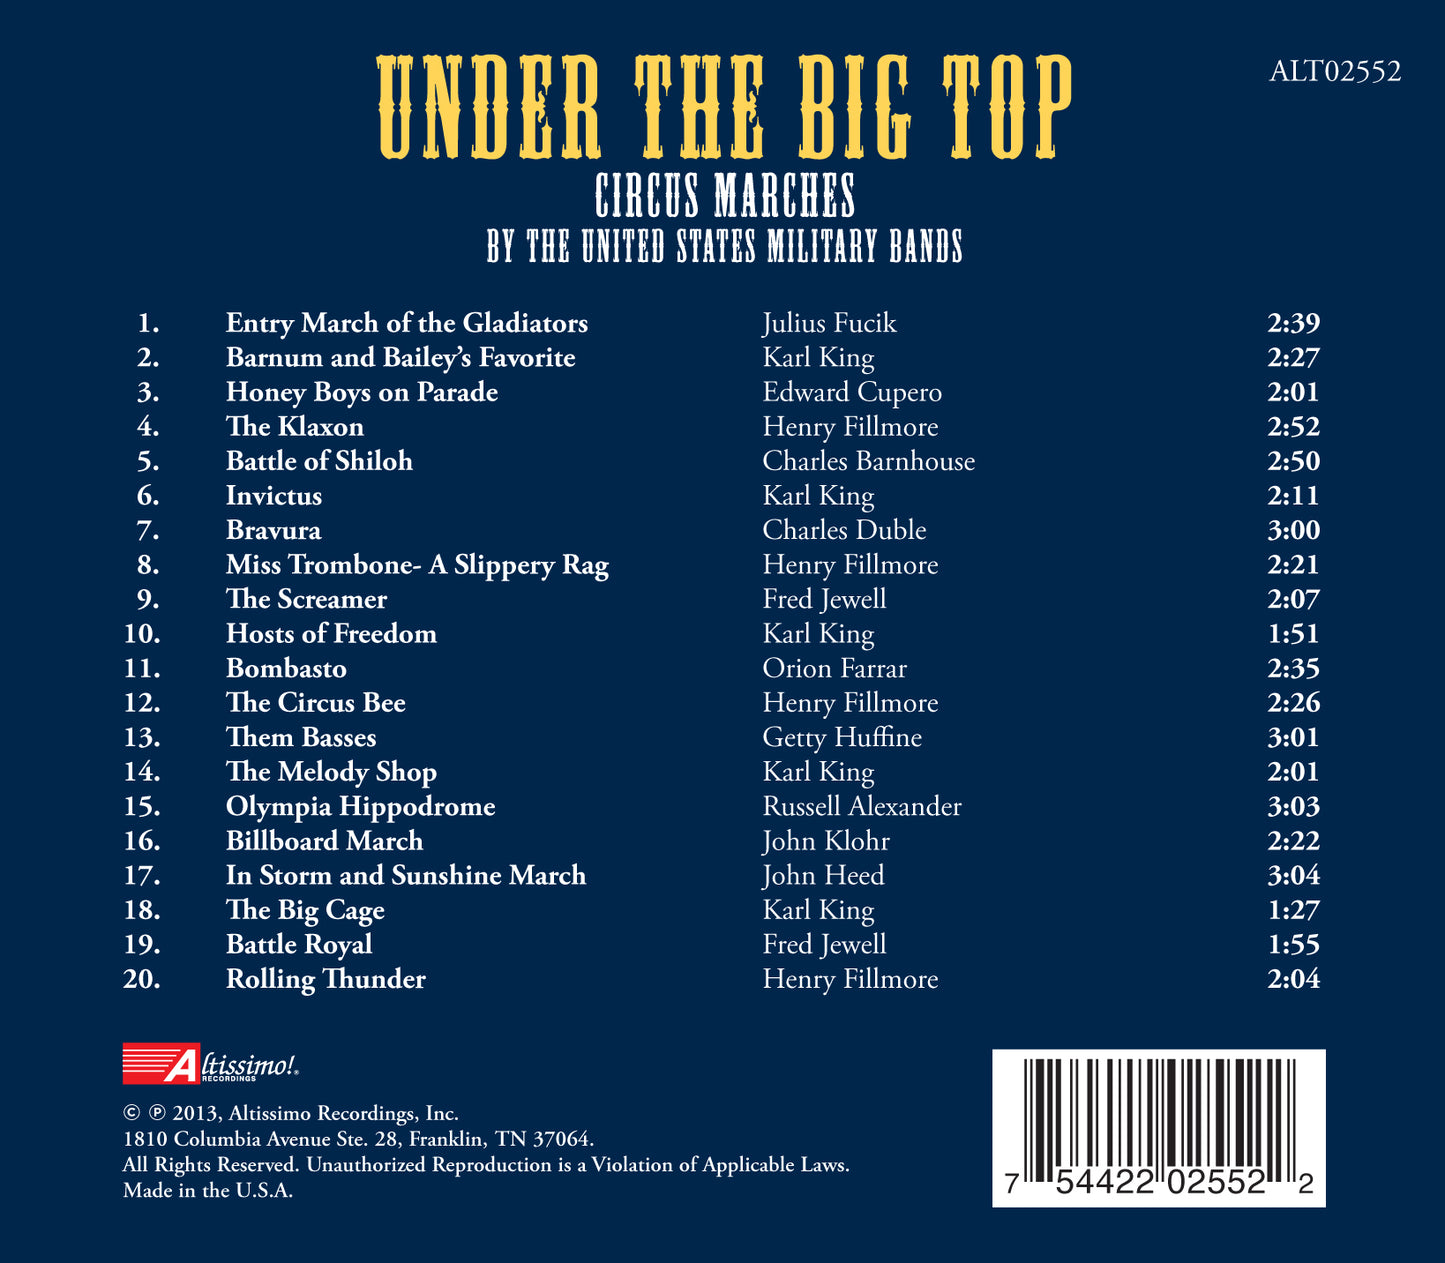 Under the Big Top / US Military Bands